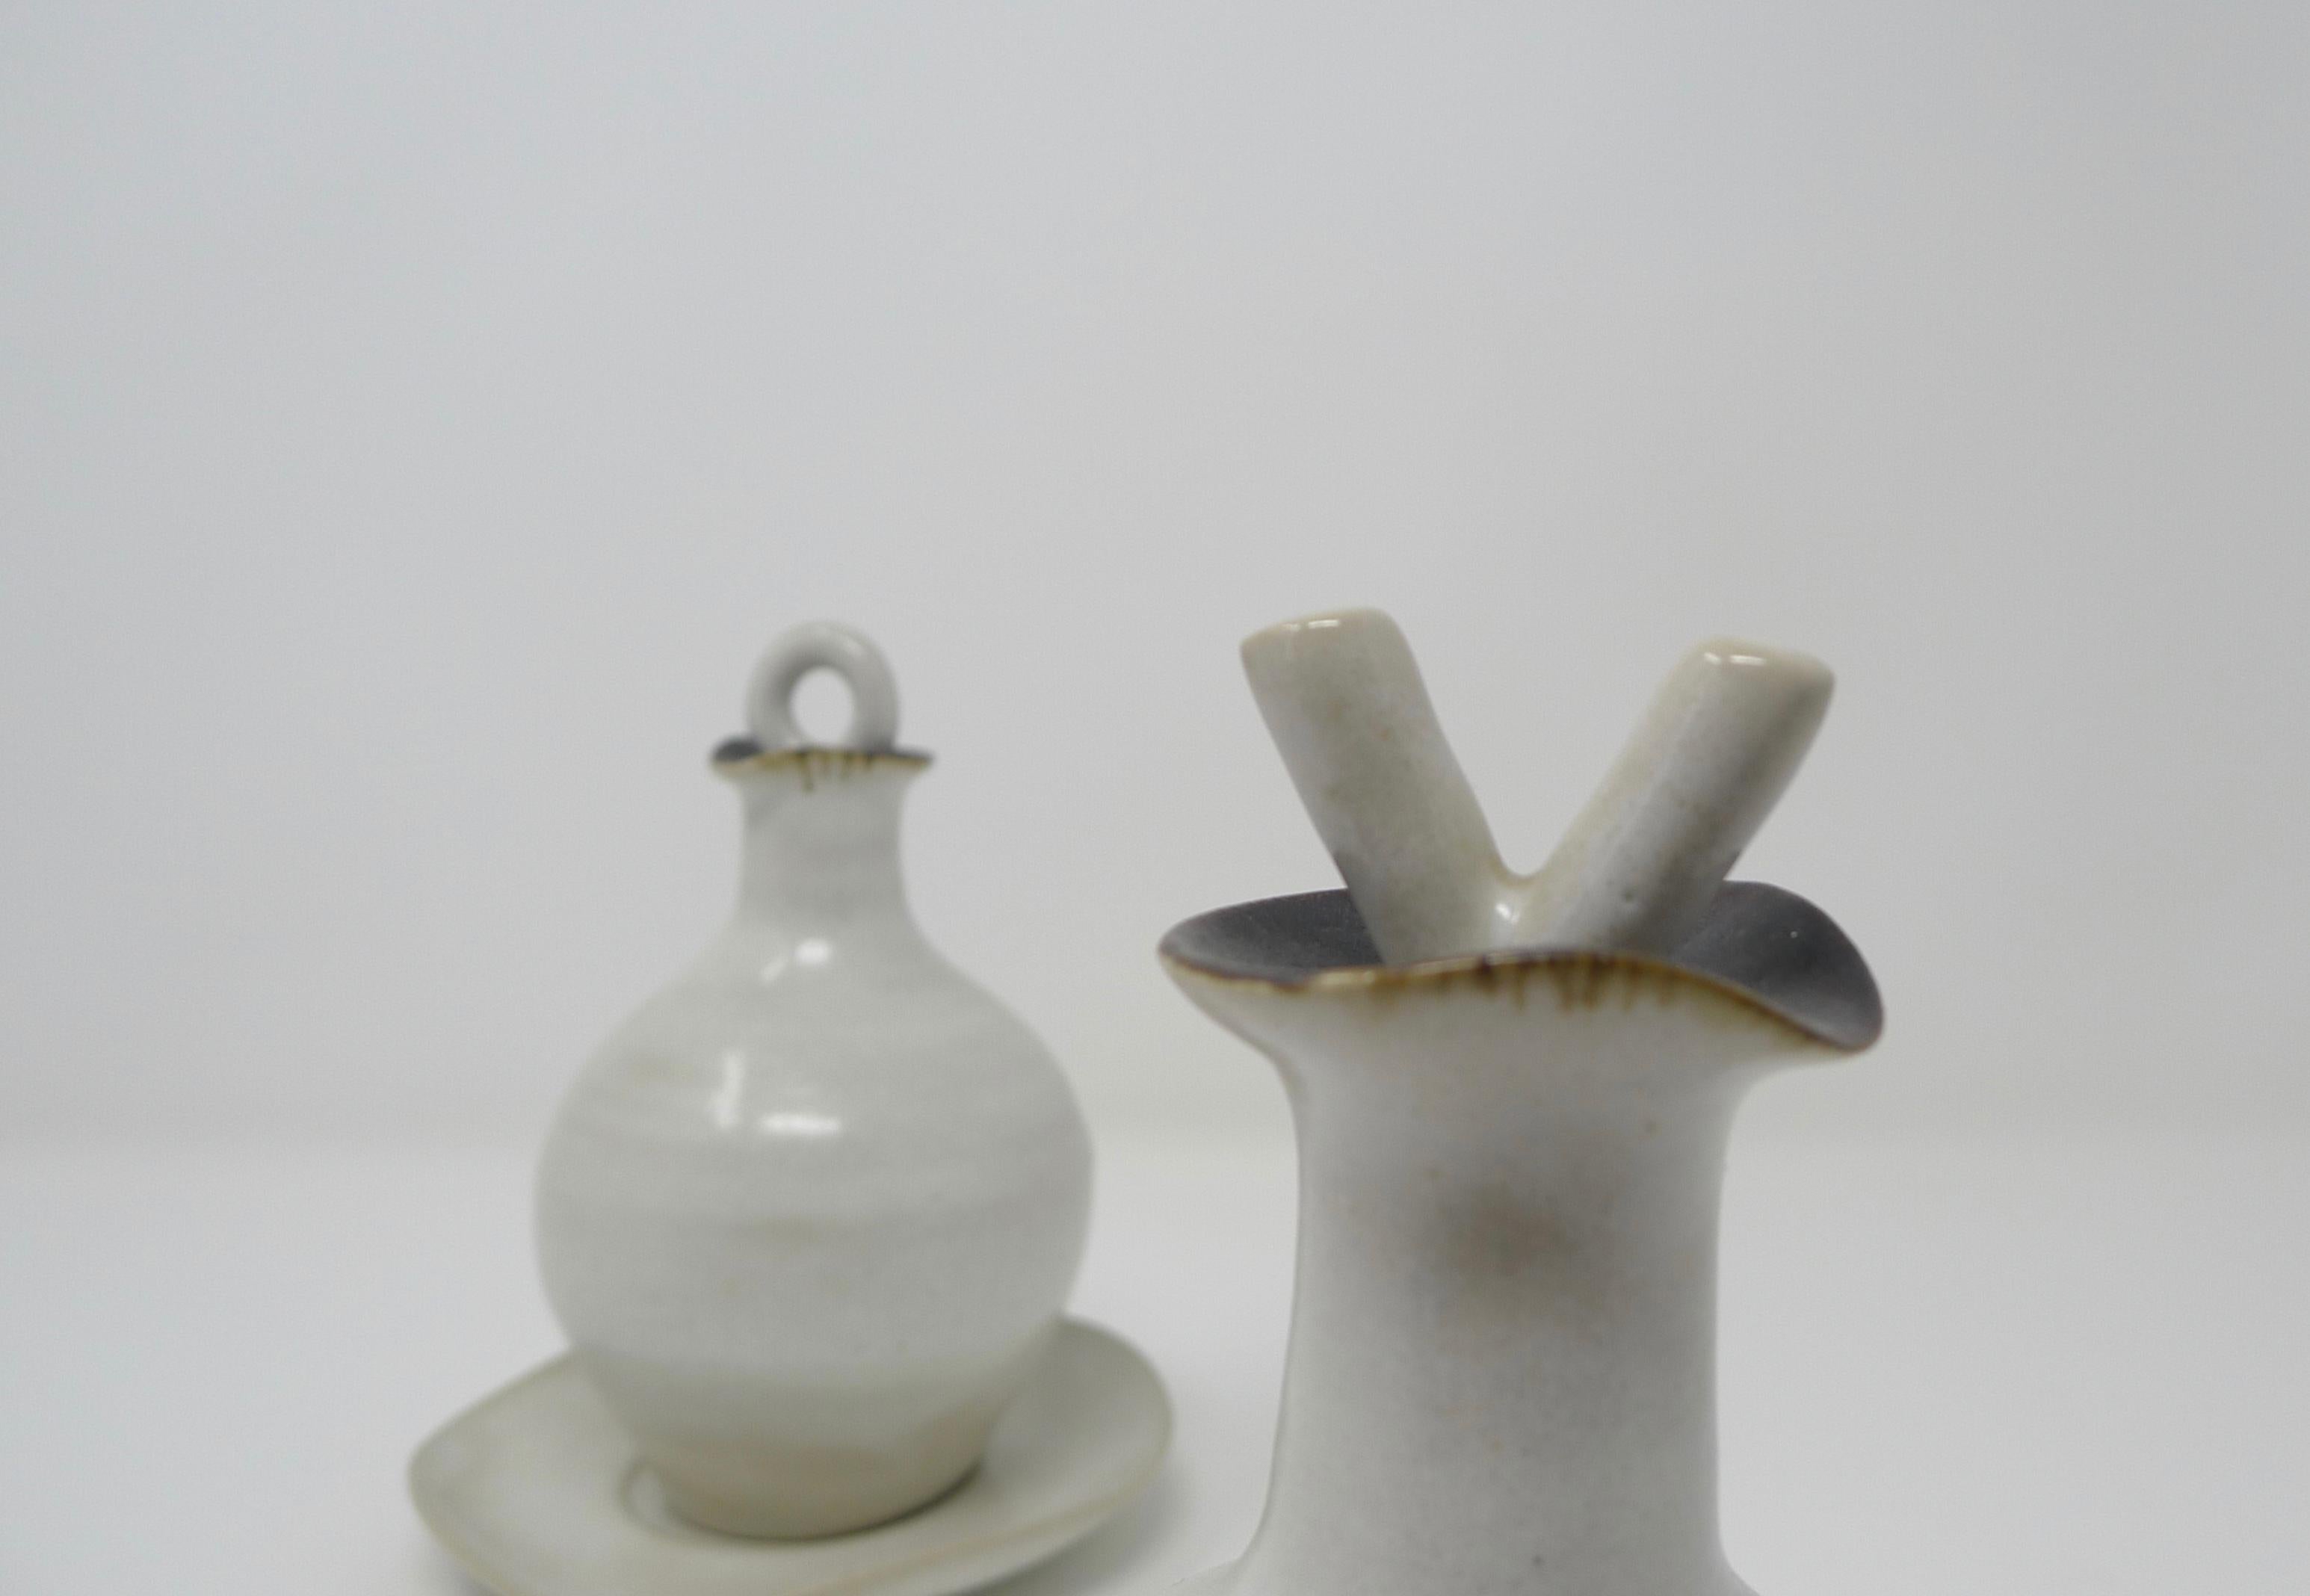 Lucie Rie; Stoneware oil and vinegar set of textured white glaze and manganese rims. Stoppers are formed in the shape of an 